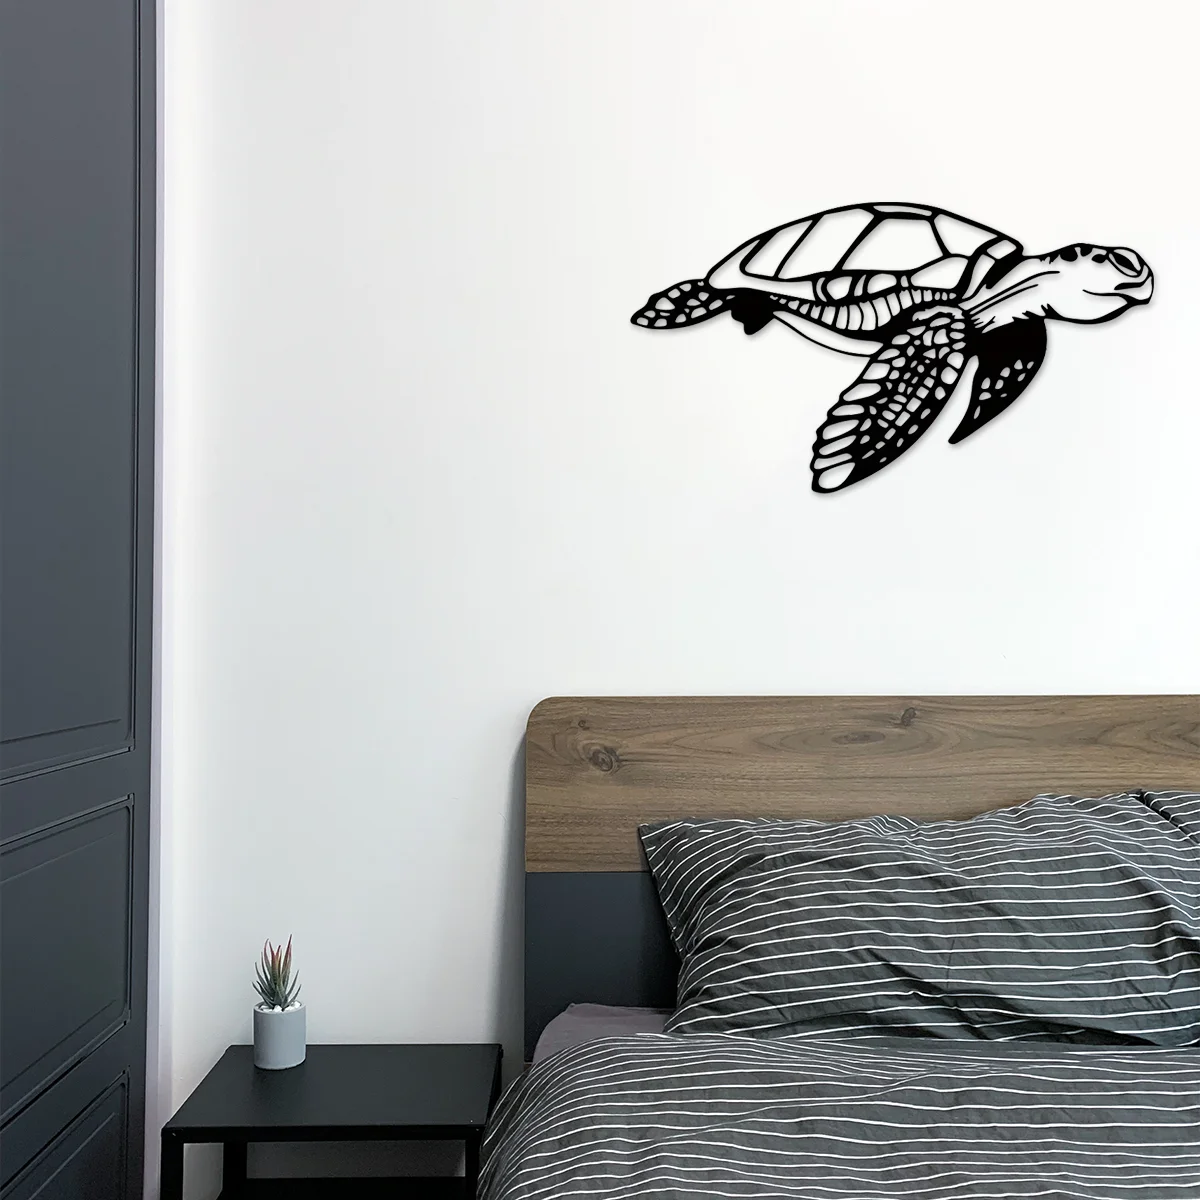 

Hello Young Metal Sea Turtle Ornament Beach Theme Decor Art Decoration Wall Hanging Home Decor Window Decals Livingroom outdoor